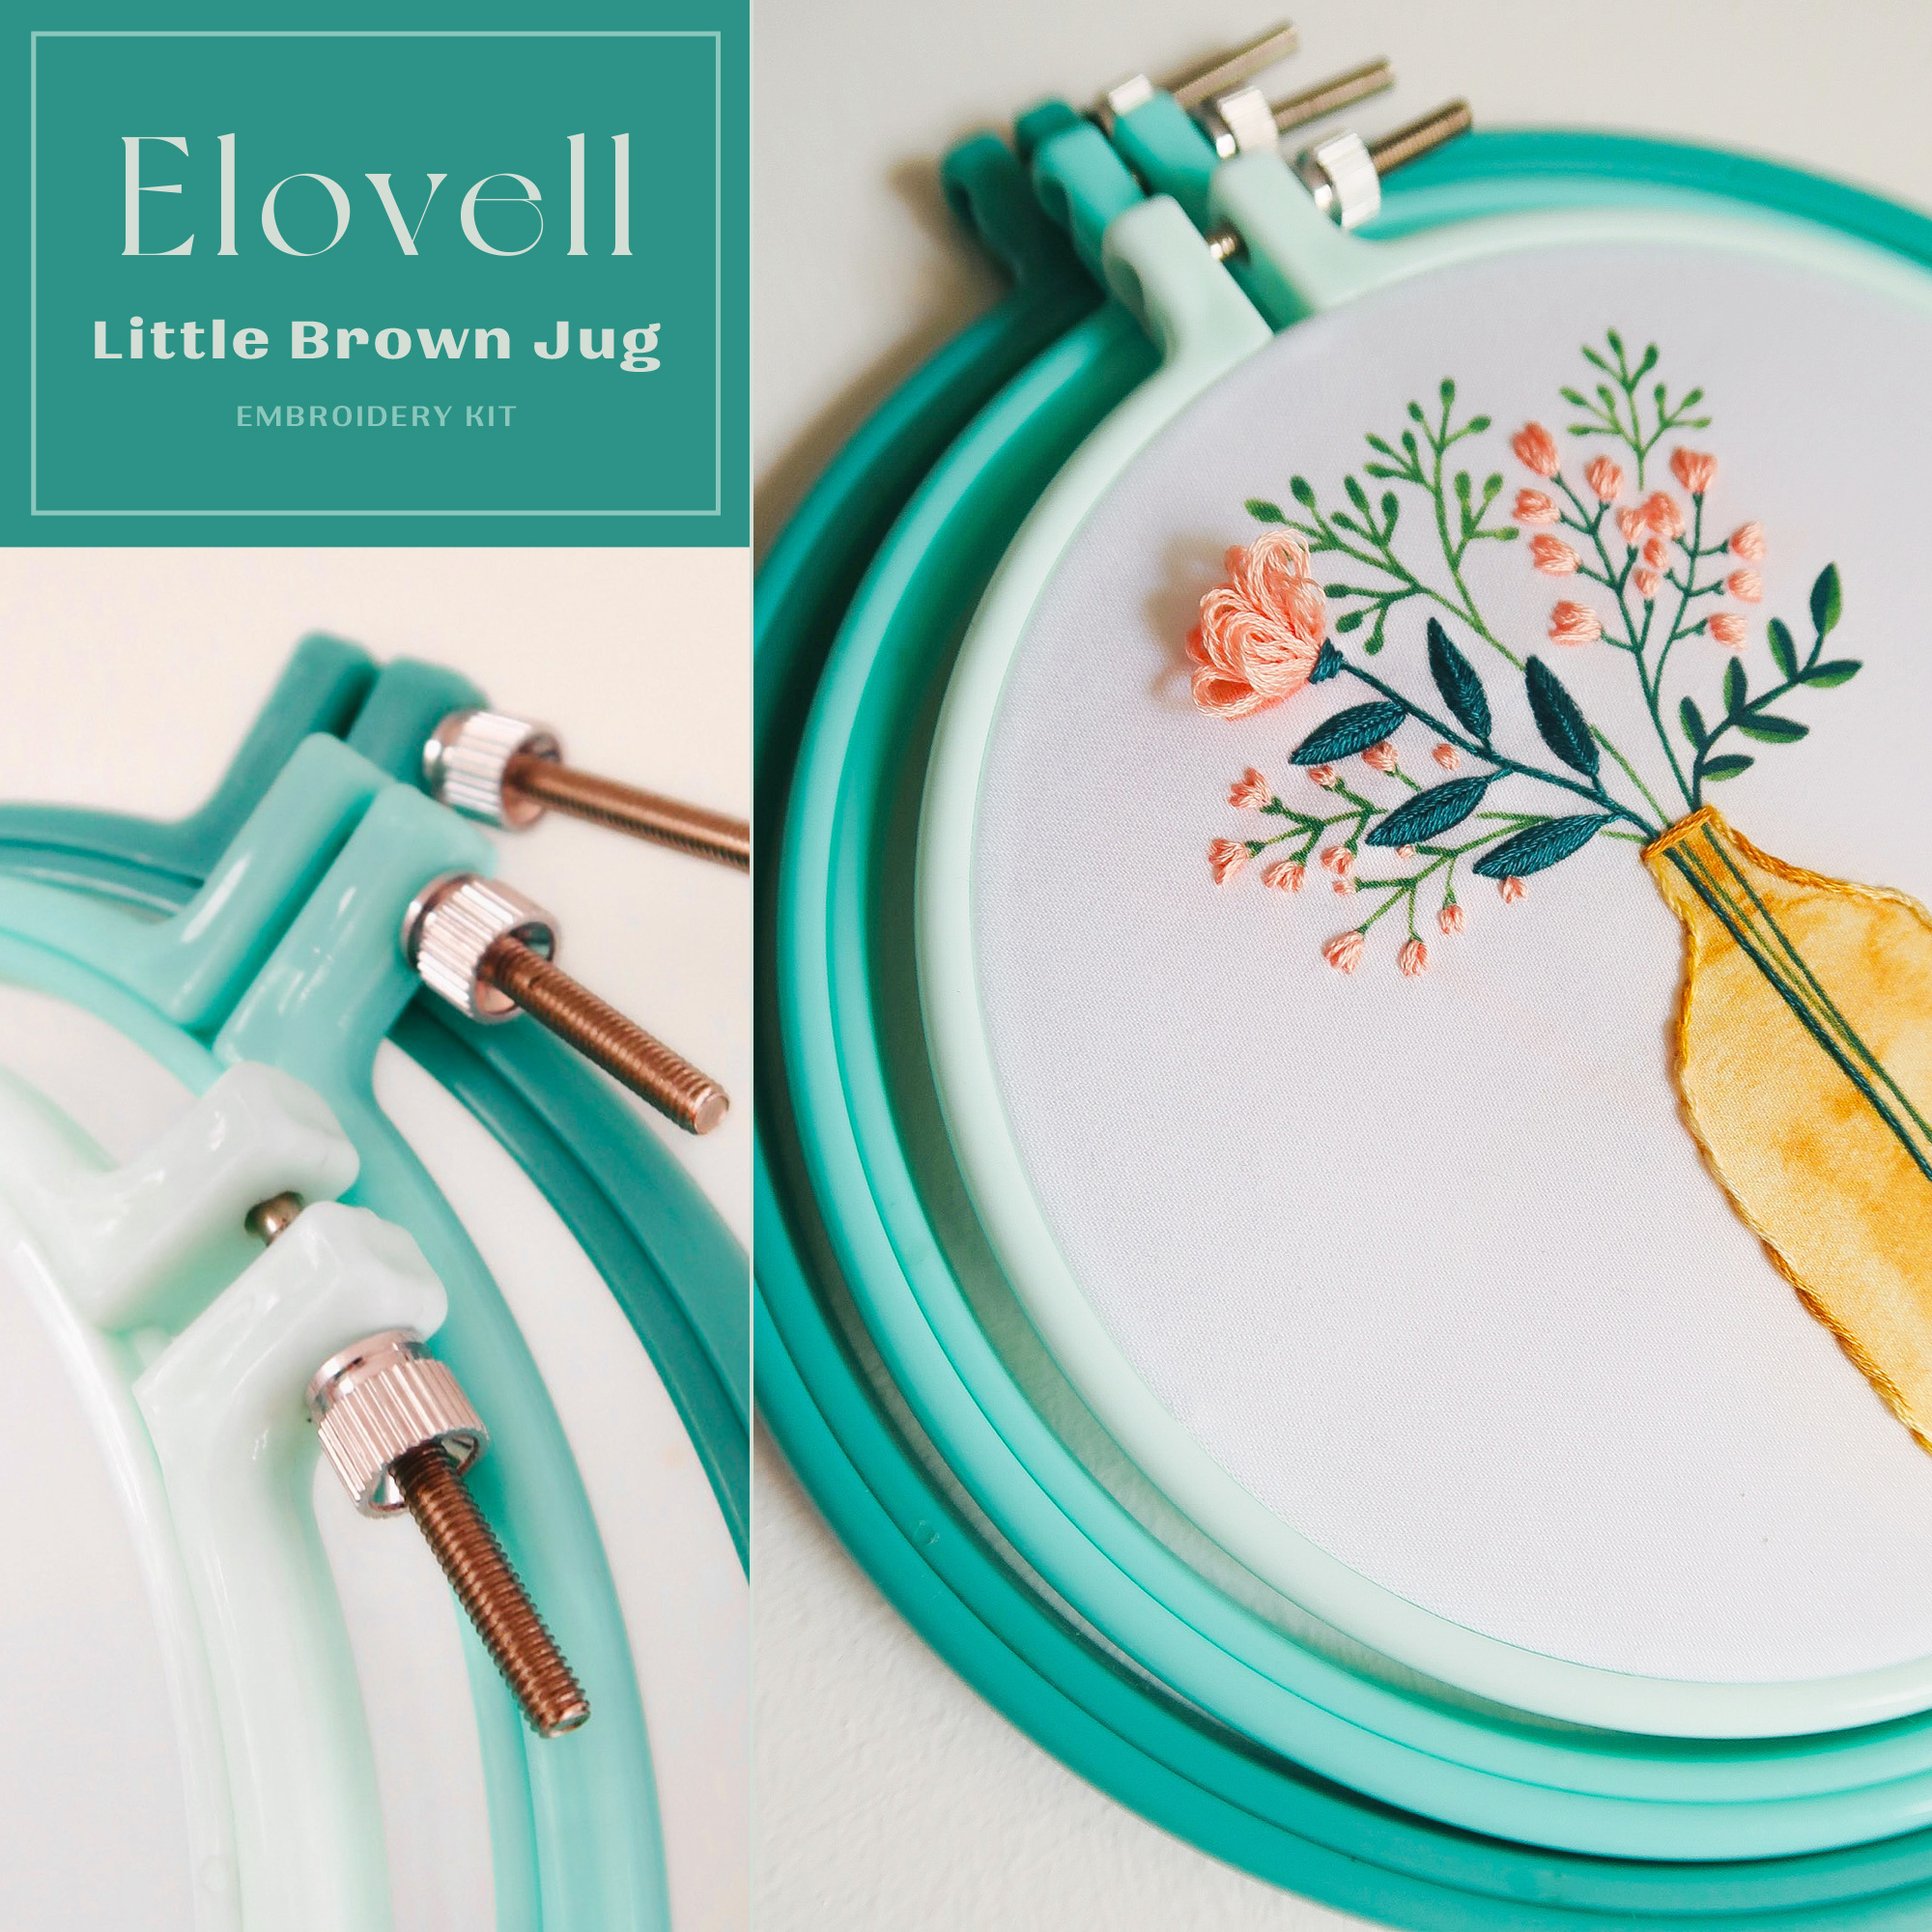 Elovell Embroidery Hoops - Laguna Collection - Brynn & Co.